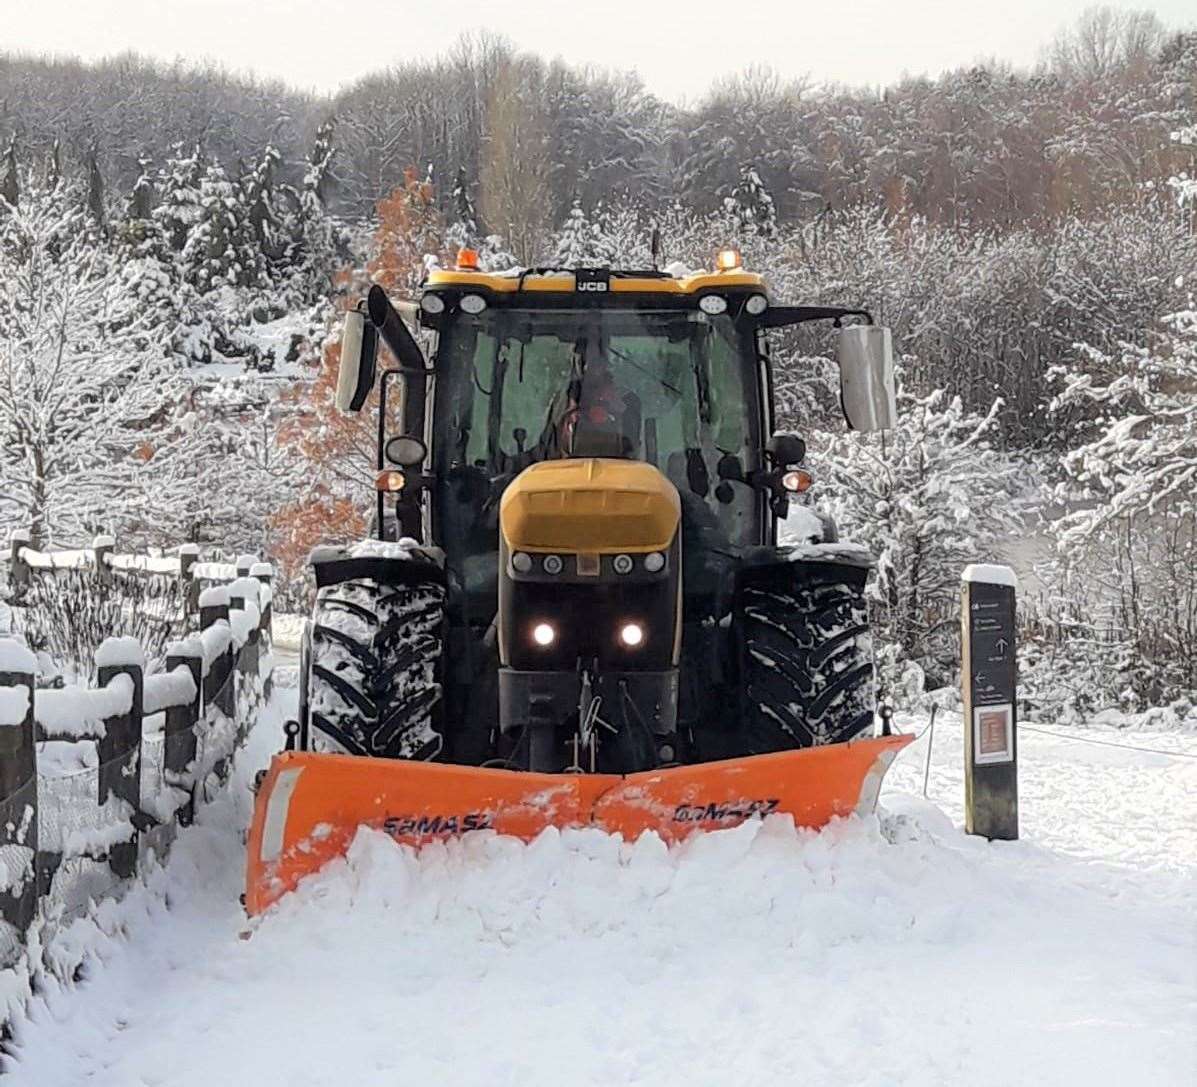 Workers have been busy clearing the park of snow. Picture: Bedgebury Pinetum Facebook